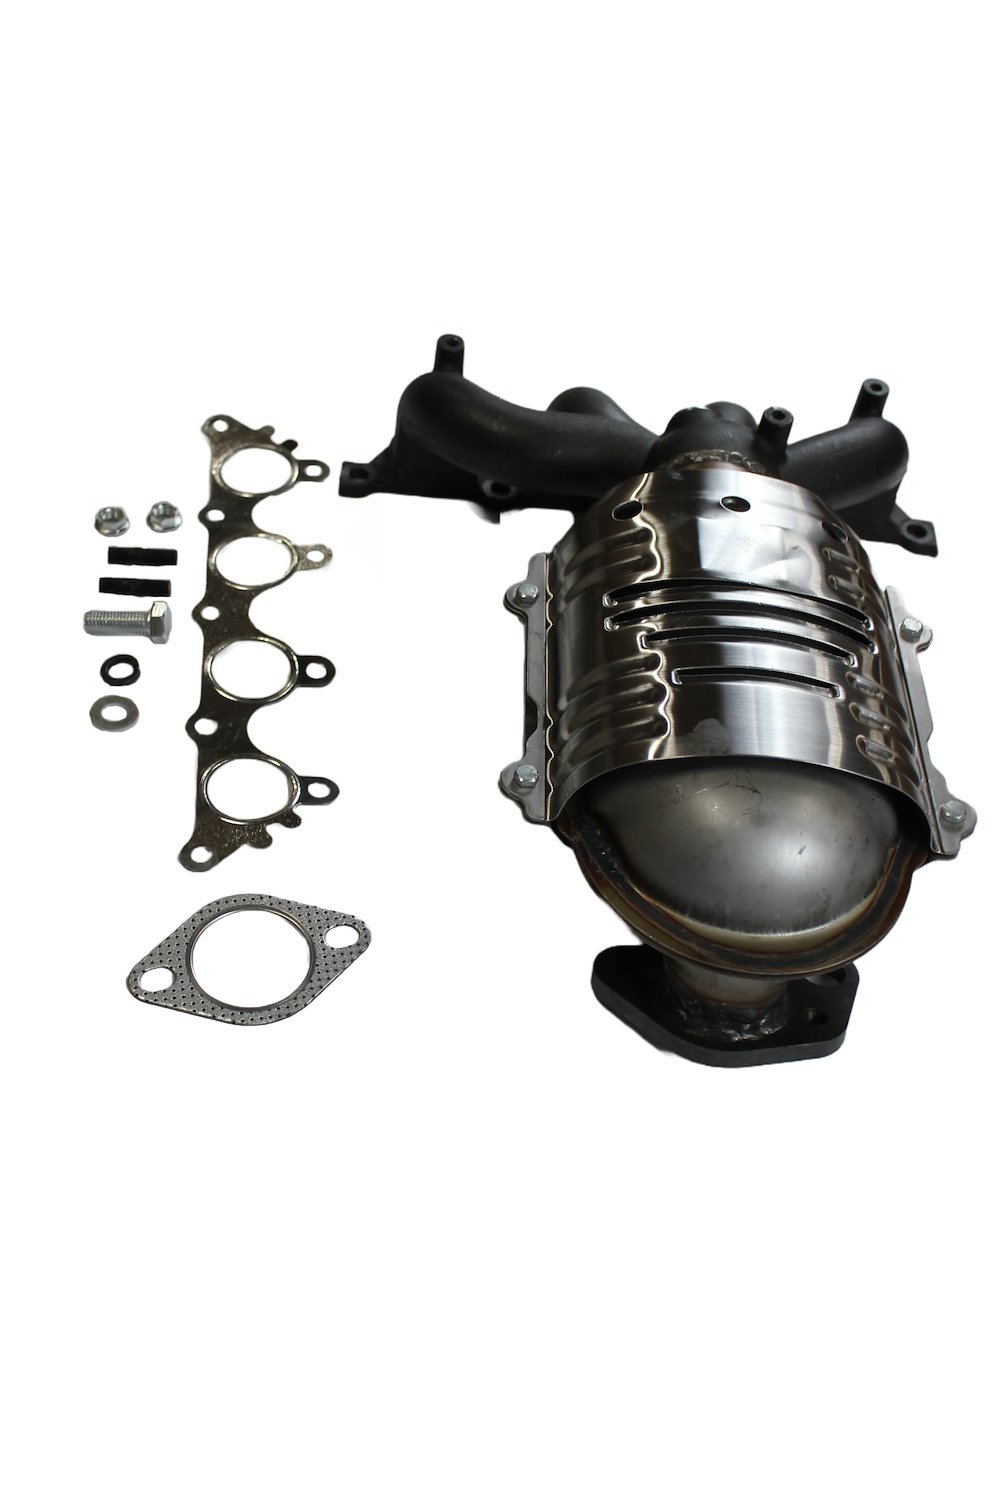 Catalytic Converter Fits 2006-2011 Hyundai Accent & Kia Rio & Rio5 w/1.6L 4 cyl. Eng. [Front]